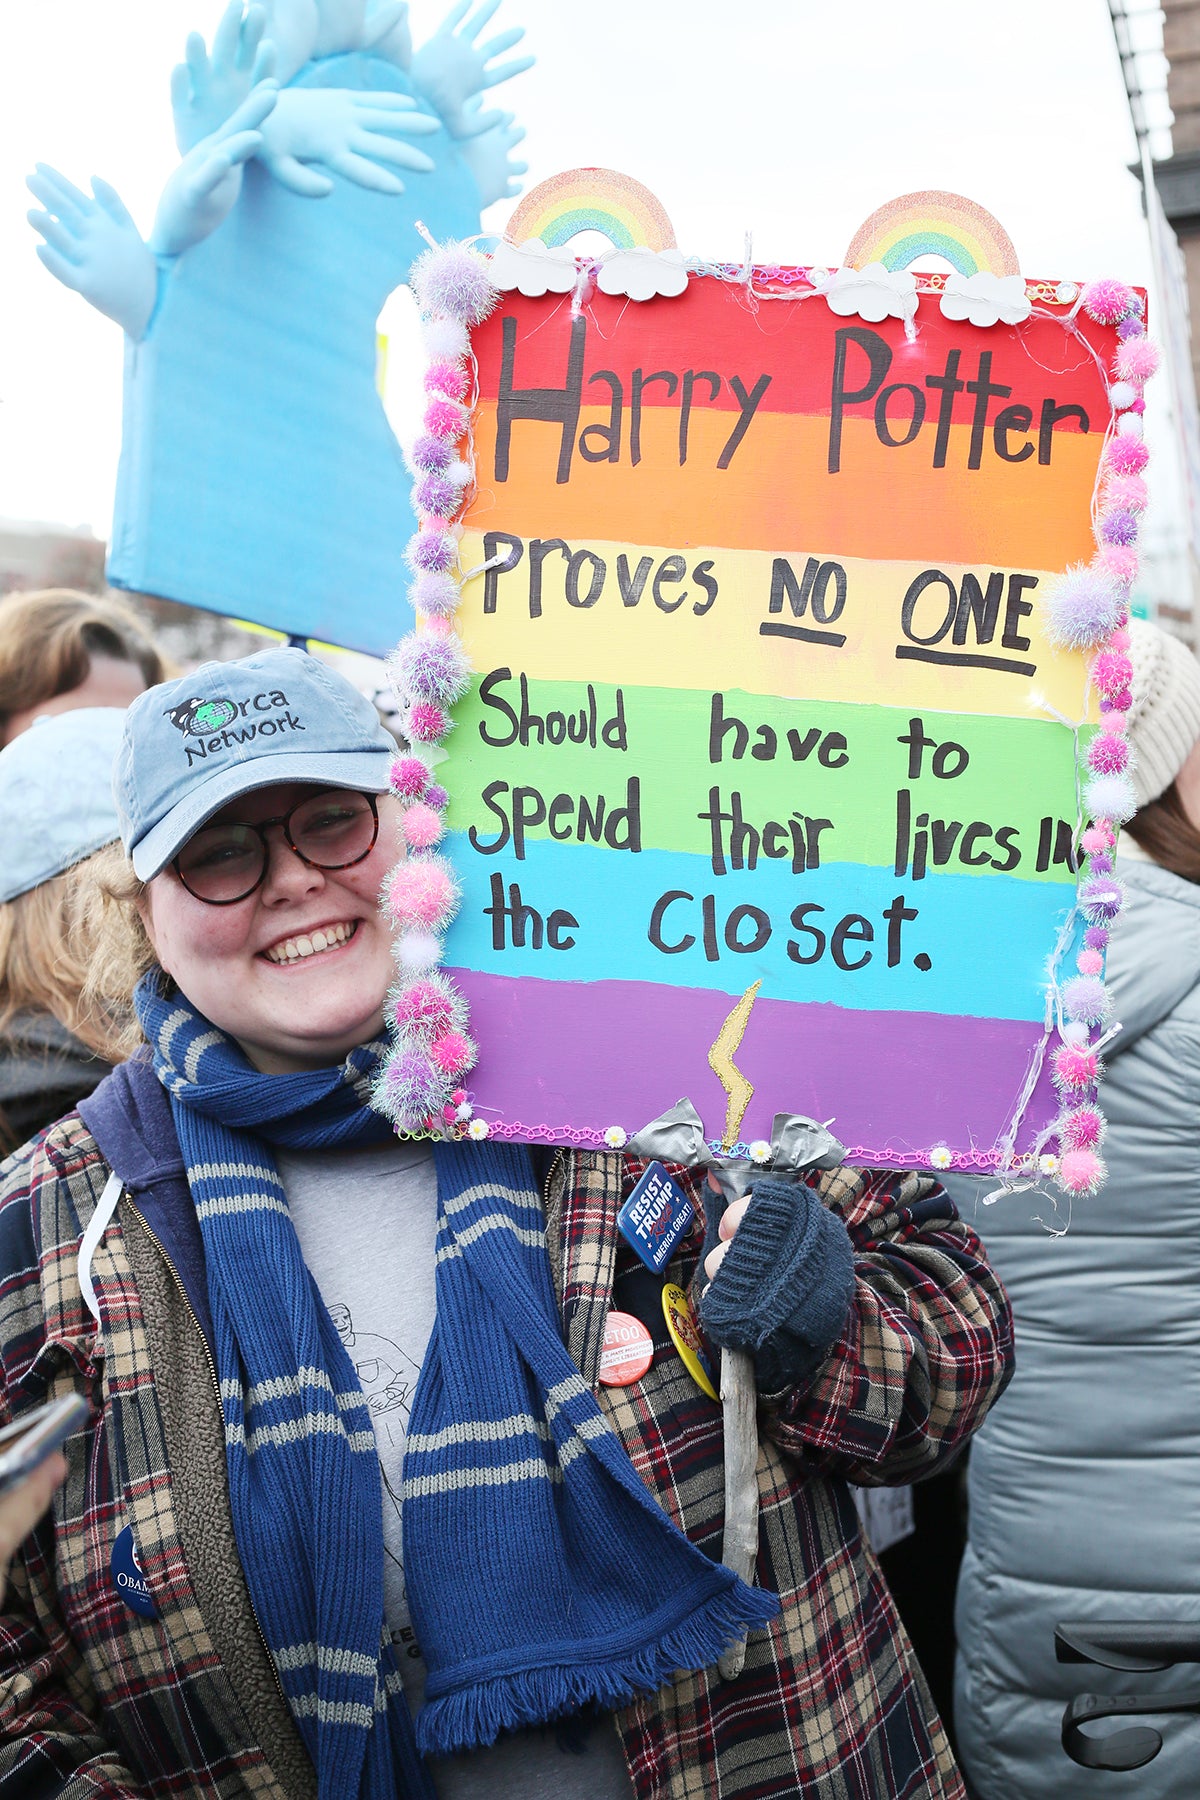 Seattle Women's March 2017 Harry Potter no one should be in the closet